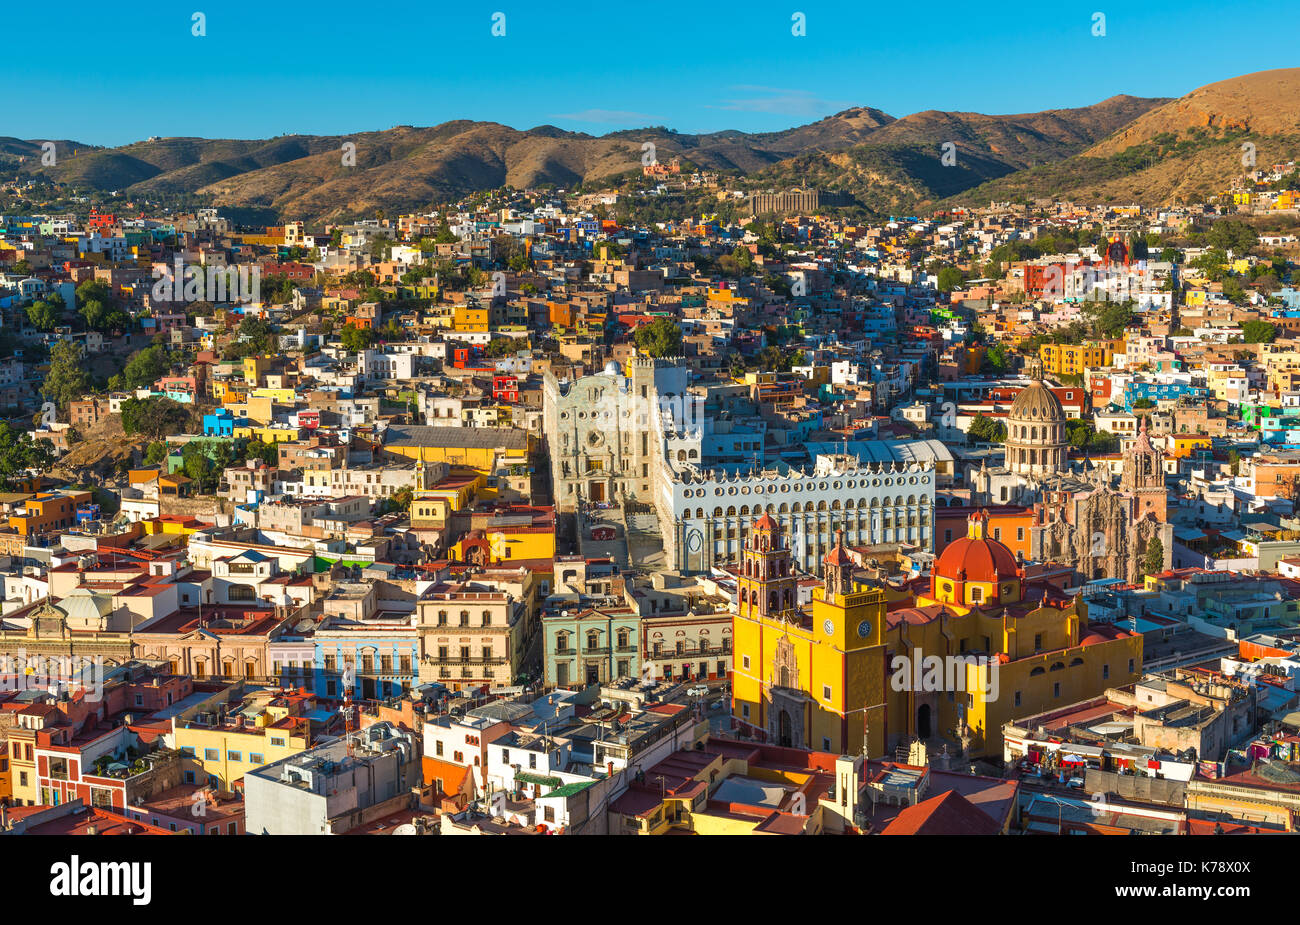 The colorful cityscape of Guanajuato city at sunset with its colorful housing and Our Lady of Guanajuato cathedral in central Mexico. Stock Photo